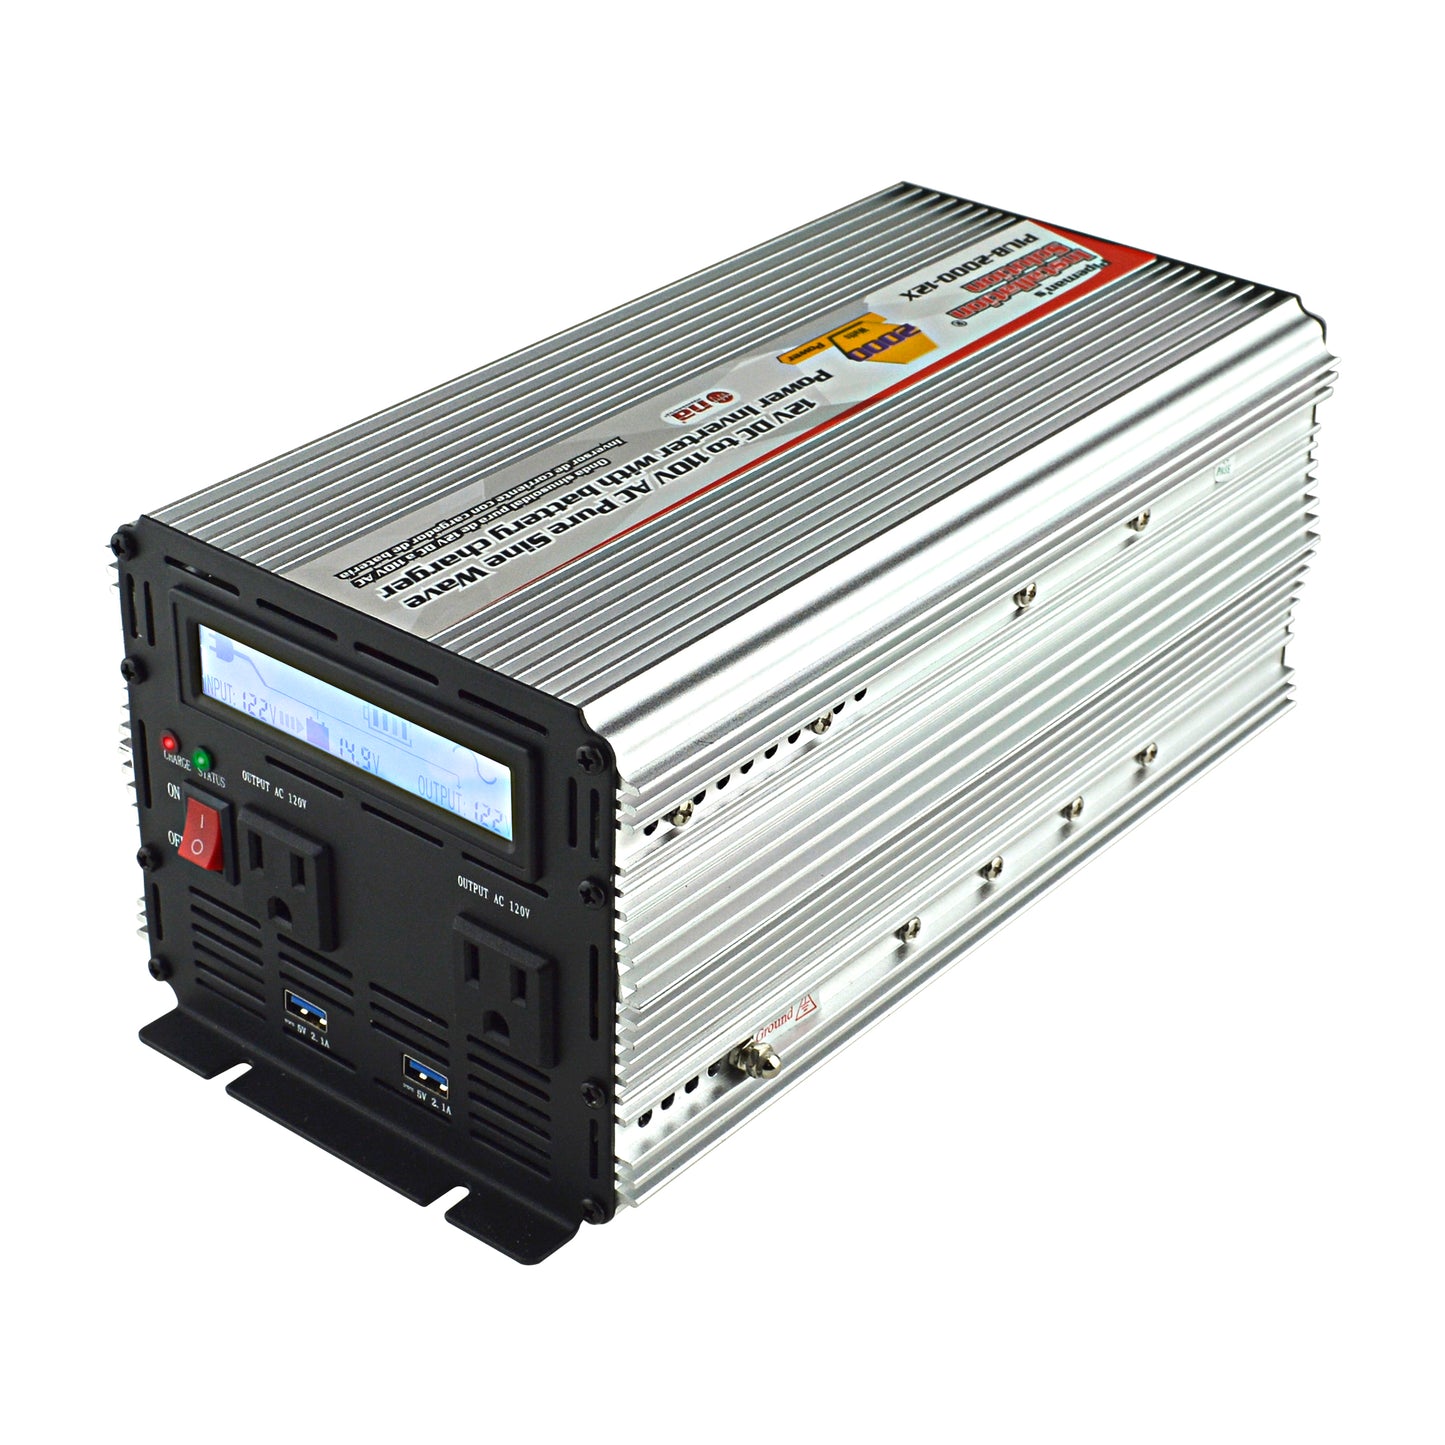 PIUB-2000-12X - 2000W 12V DC to 110V AC Pure Sine Wave Power Inverter with Battery Charger